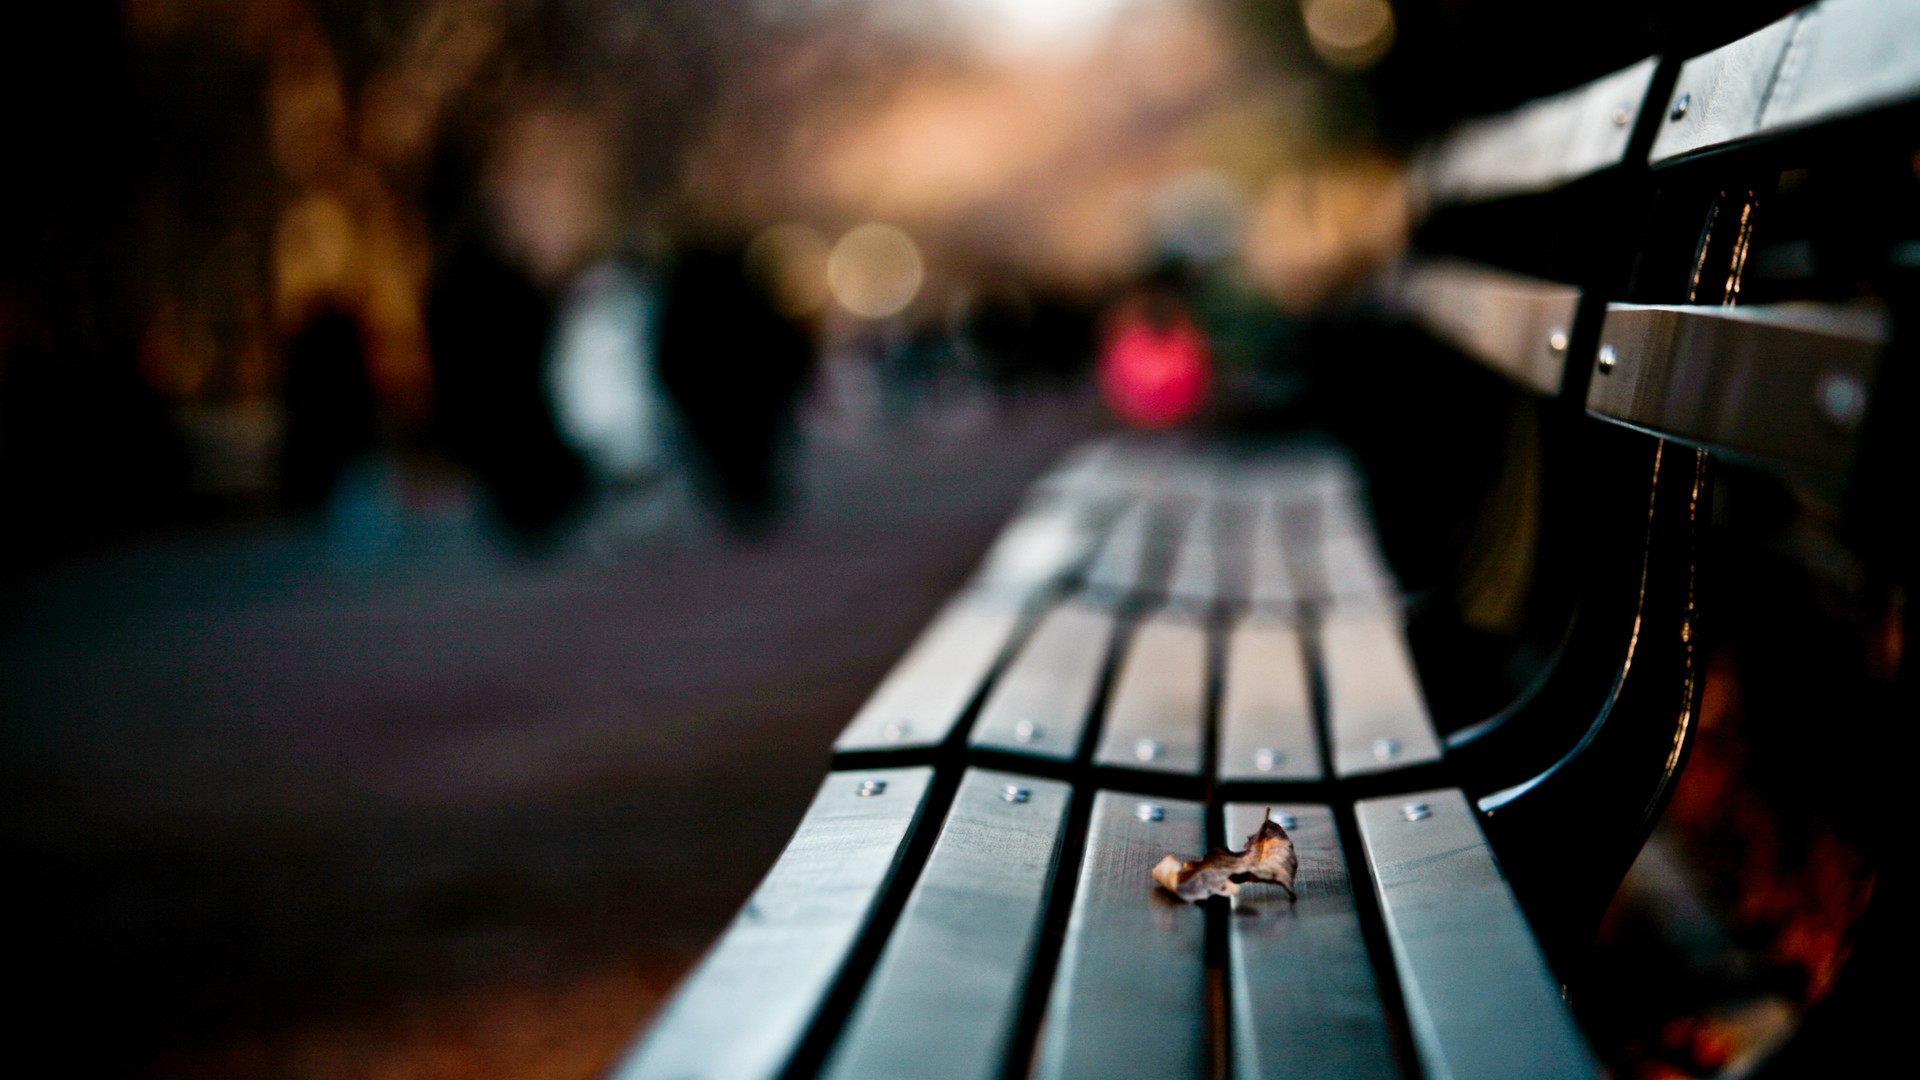 One leaf on a bench - HD blurry wallpaper